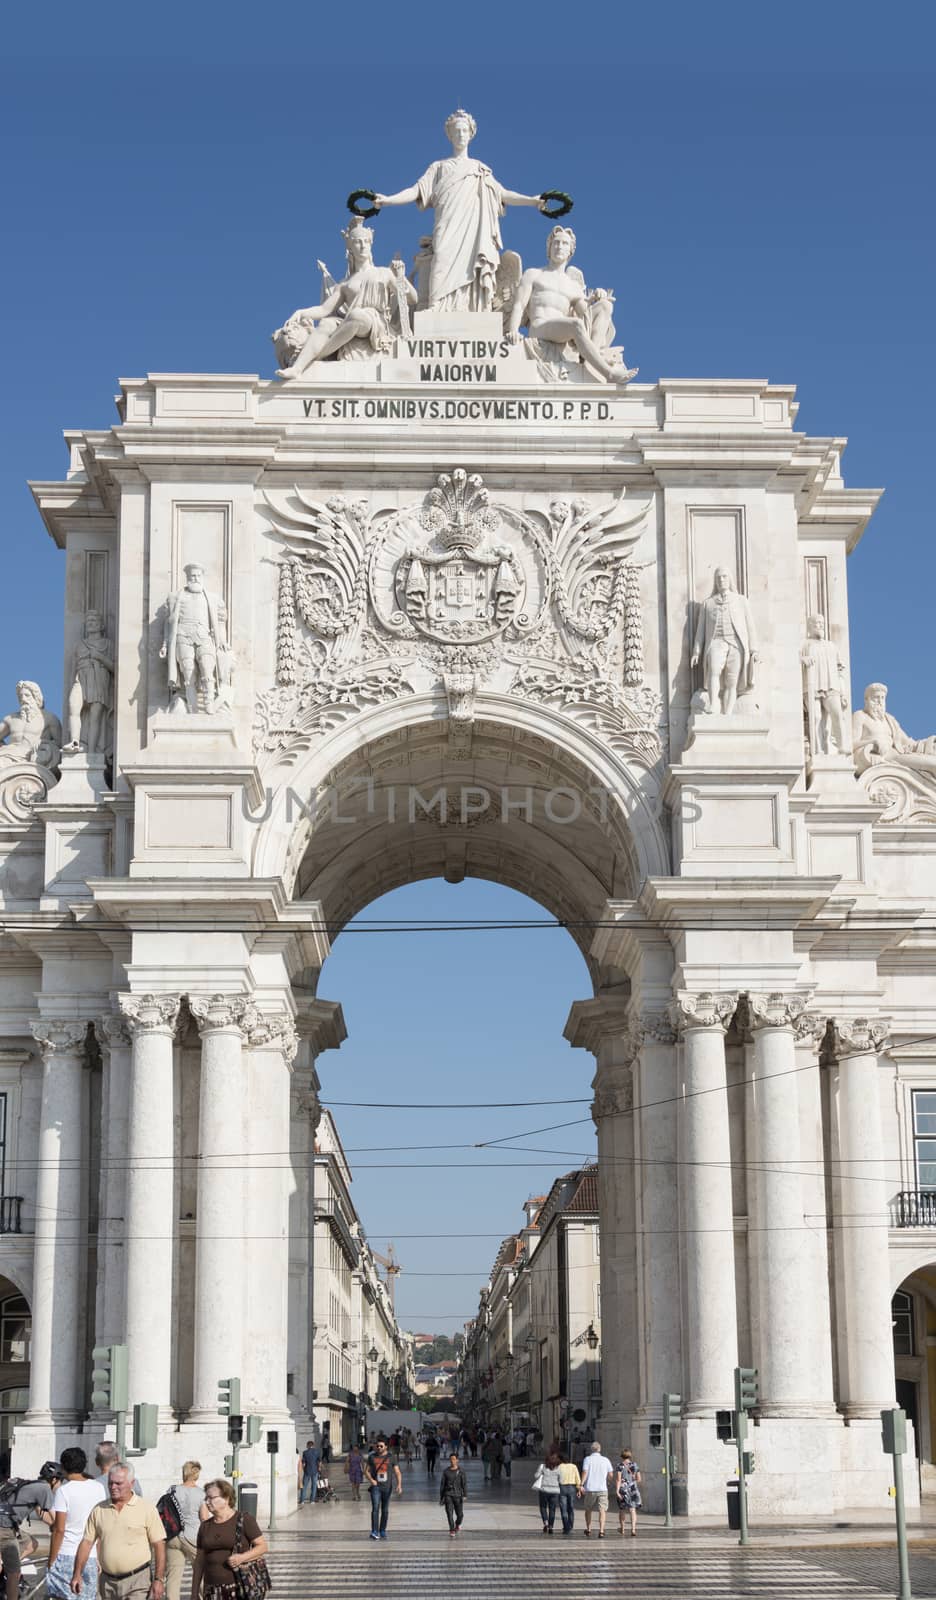 LISBON, PORTUGAL - SEPTEMBER 26, 2015: unidentified people walking at Rua Augusta arch in  Lisbon on September 26, 2015. Lisbon is a capital and must famous city of Portugal